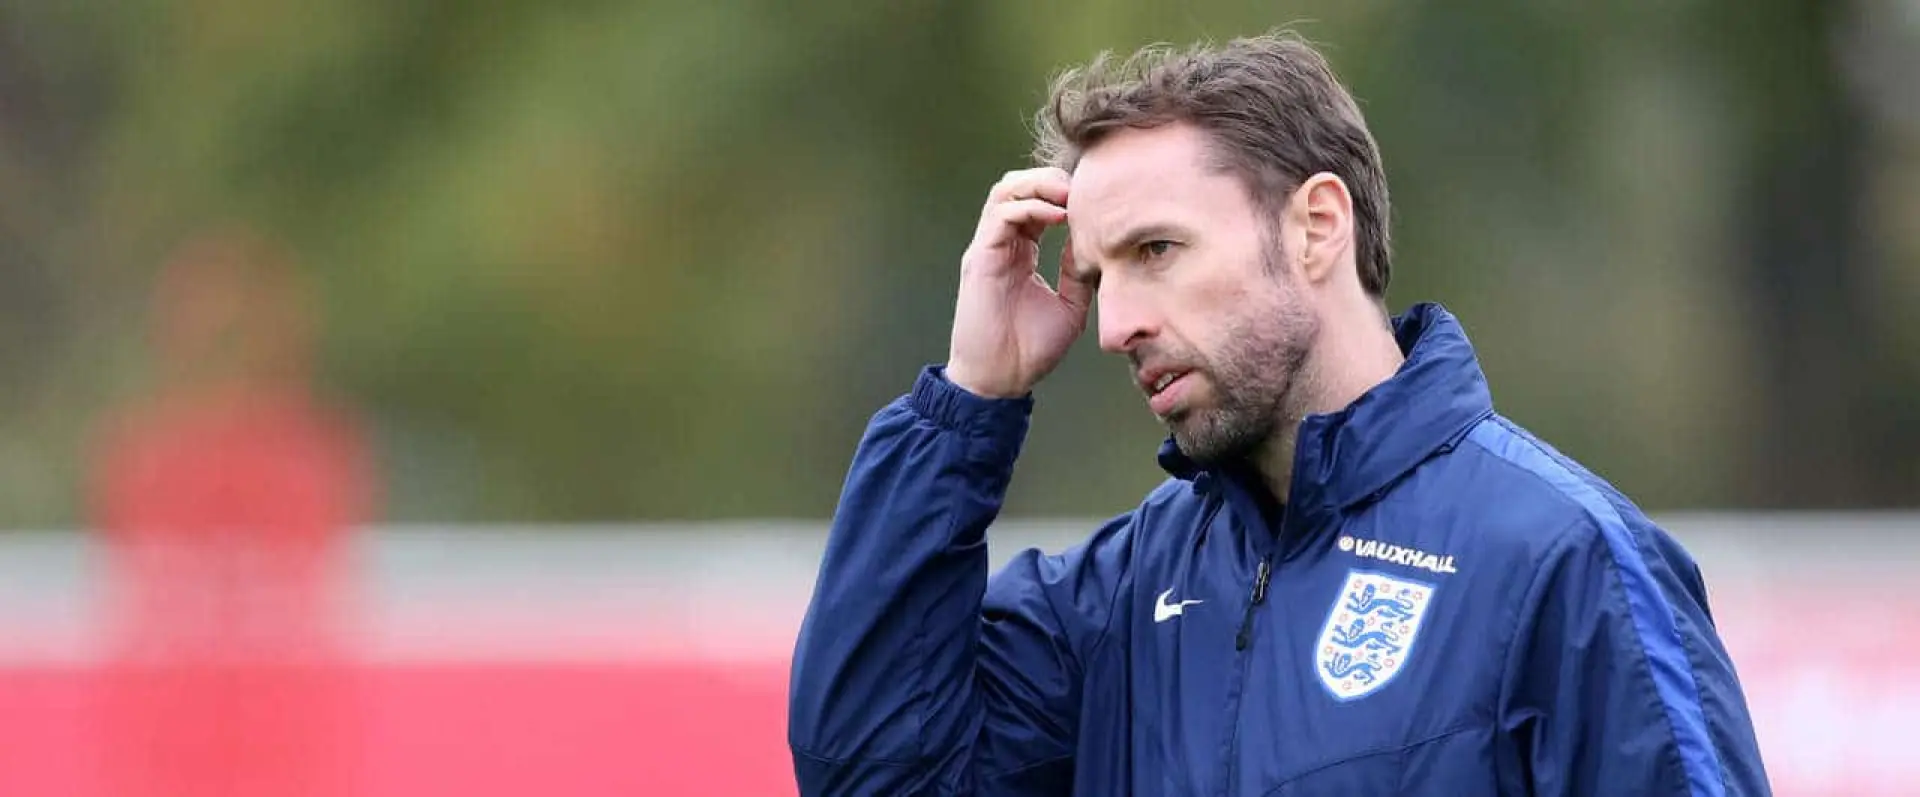 Coral look at five reasons why Southgate should be next permanent England manager.